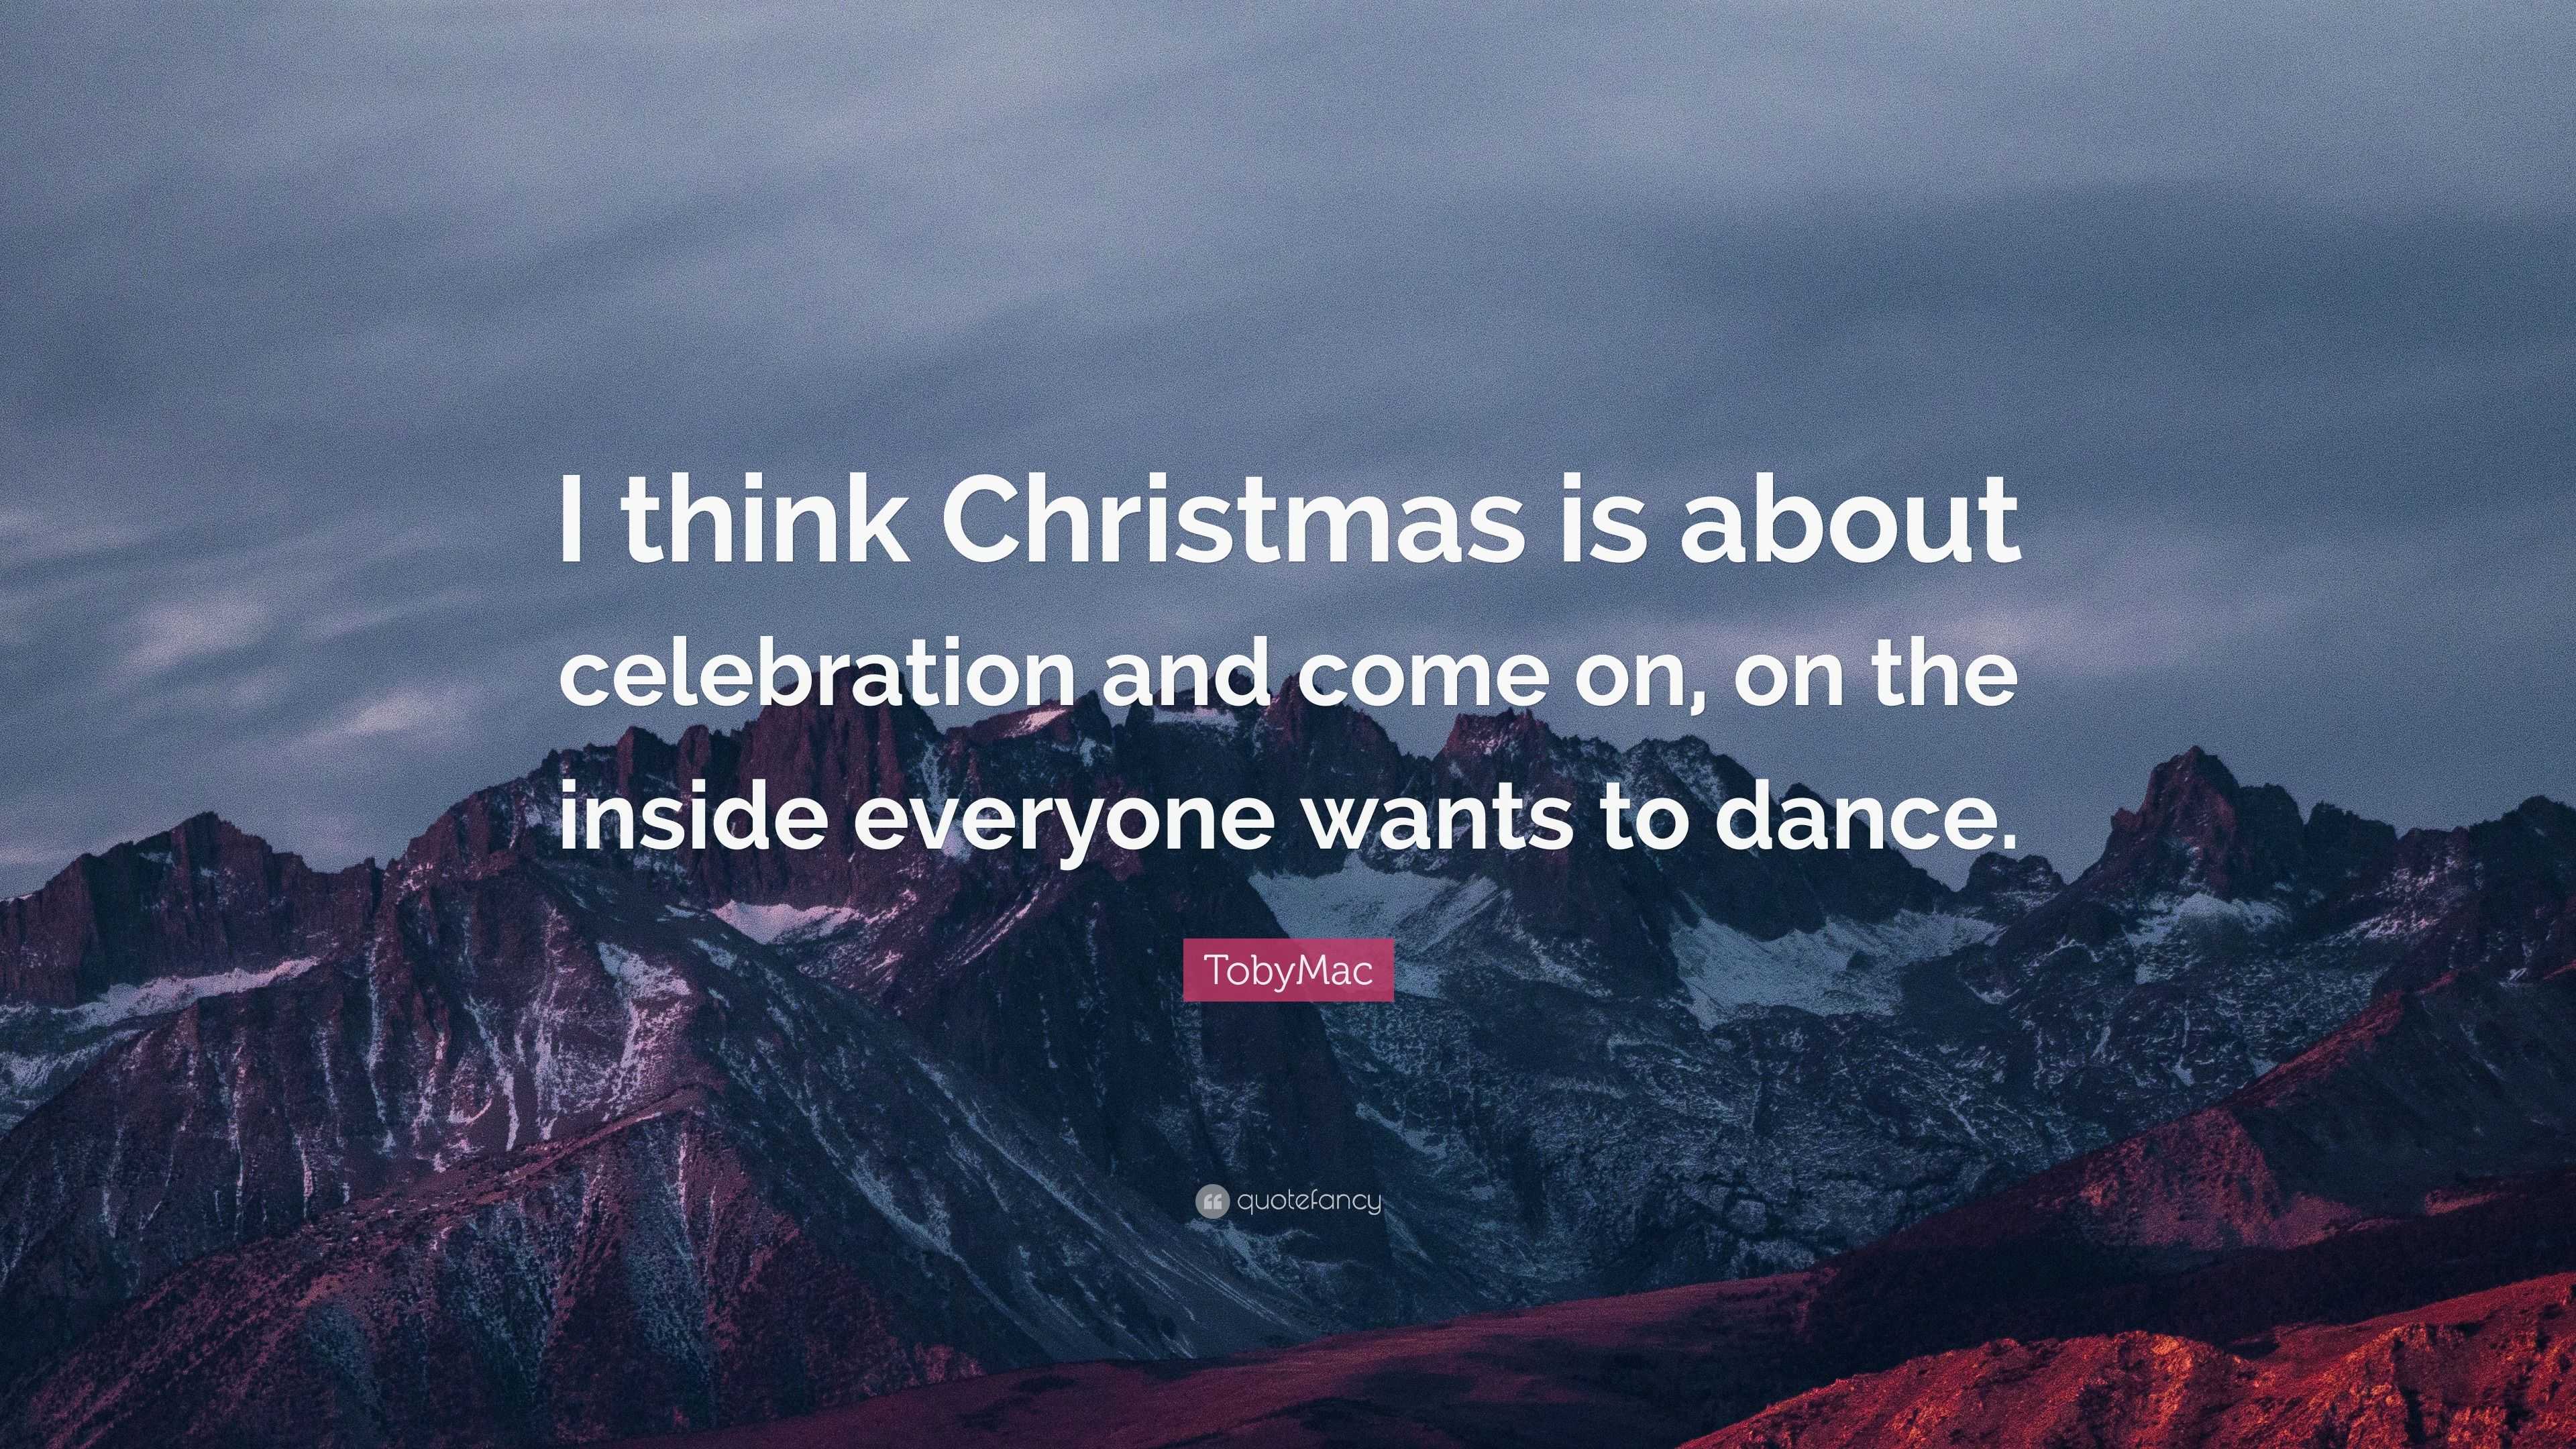 TobyMac Quote “I think Christmas is about celebration and come on, on